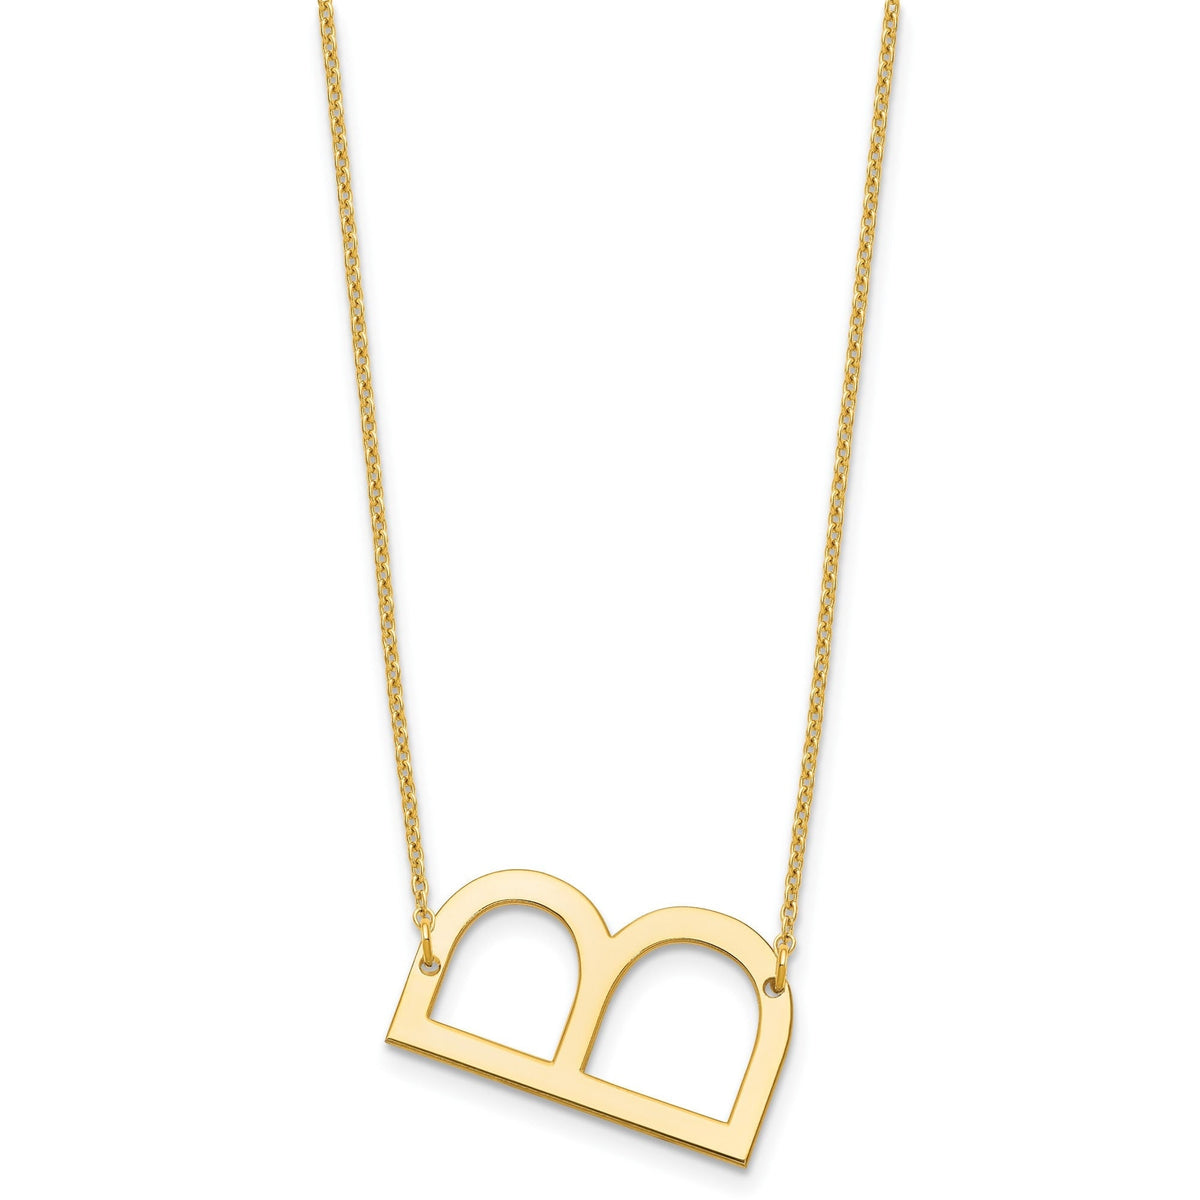 Big Letter Necklace Sterling Silver , Gold Plated Sterling Silver & 10k - Gift Box Included - Large Initial Necklace - Big Sideways Necklace